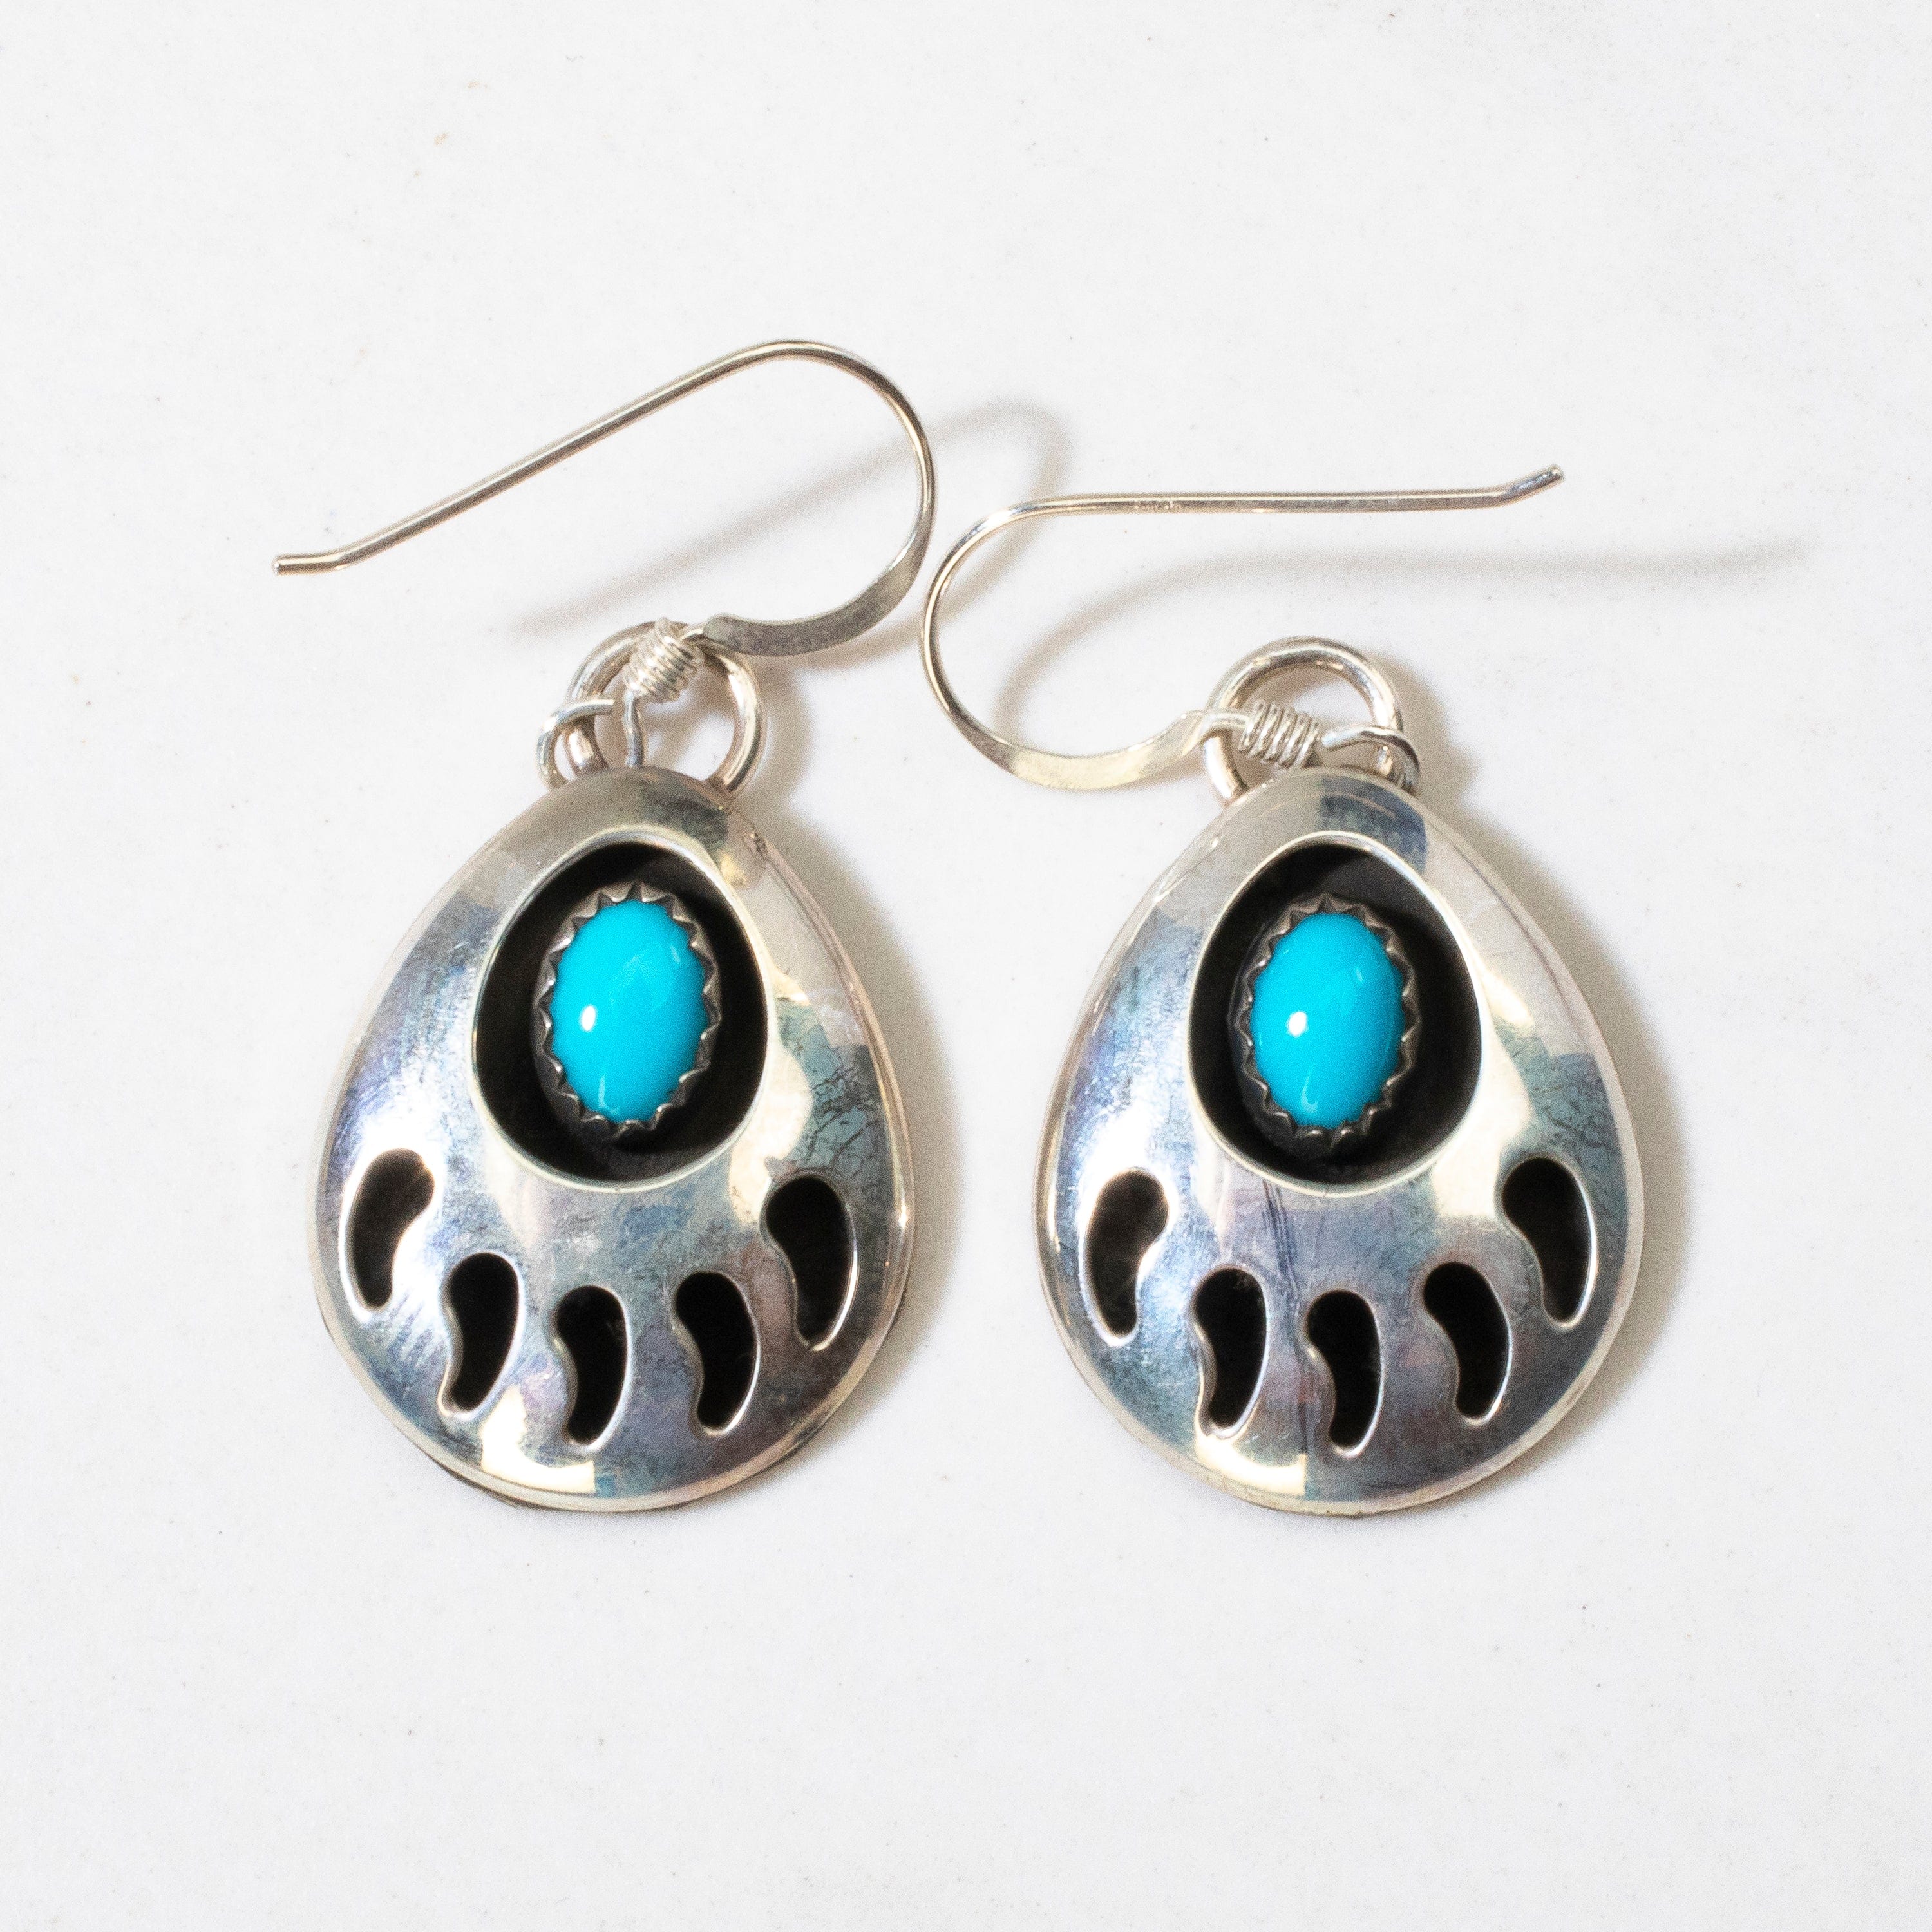 Kalifano Native American Jewelry Sleeping Beauty Turquoise Bear Paw Navajo USA Native American Made 925 Sterling Silver Earrings with French Hook NAE250.007